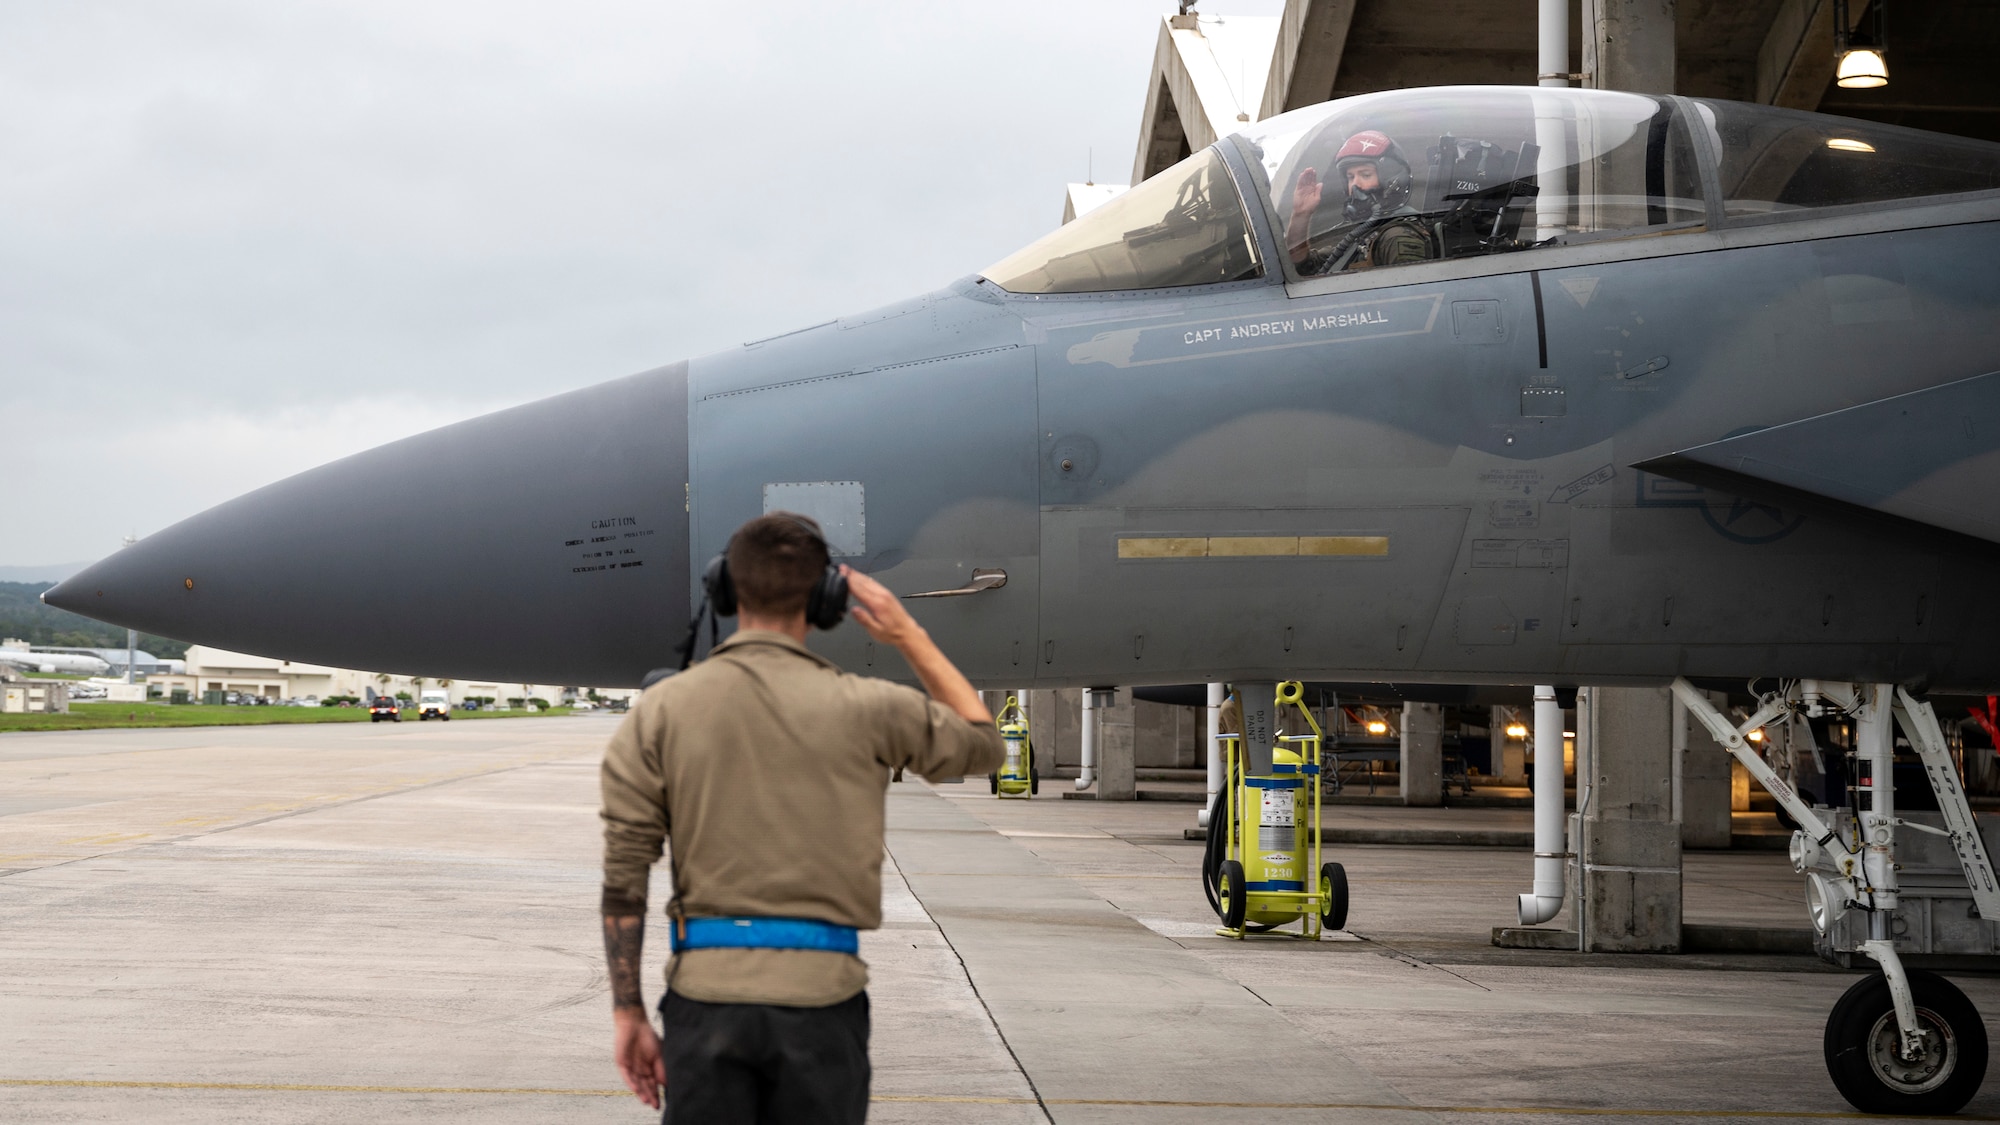 A U.S. Air Force crew chief assigned to the 44th Aircraft Maintenance Unit salutes an F-15C Eagle pilot as he taxis onto the flightline at Kadena Air Base, Japan, Dec. 1, 2022. The 18th Wing bid farewell to several aircraft during the first part of the Eagles' phased withdrawal. (U.S. Air Force photo by Senior Airman Jessi Roth)